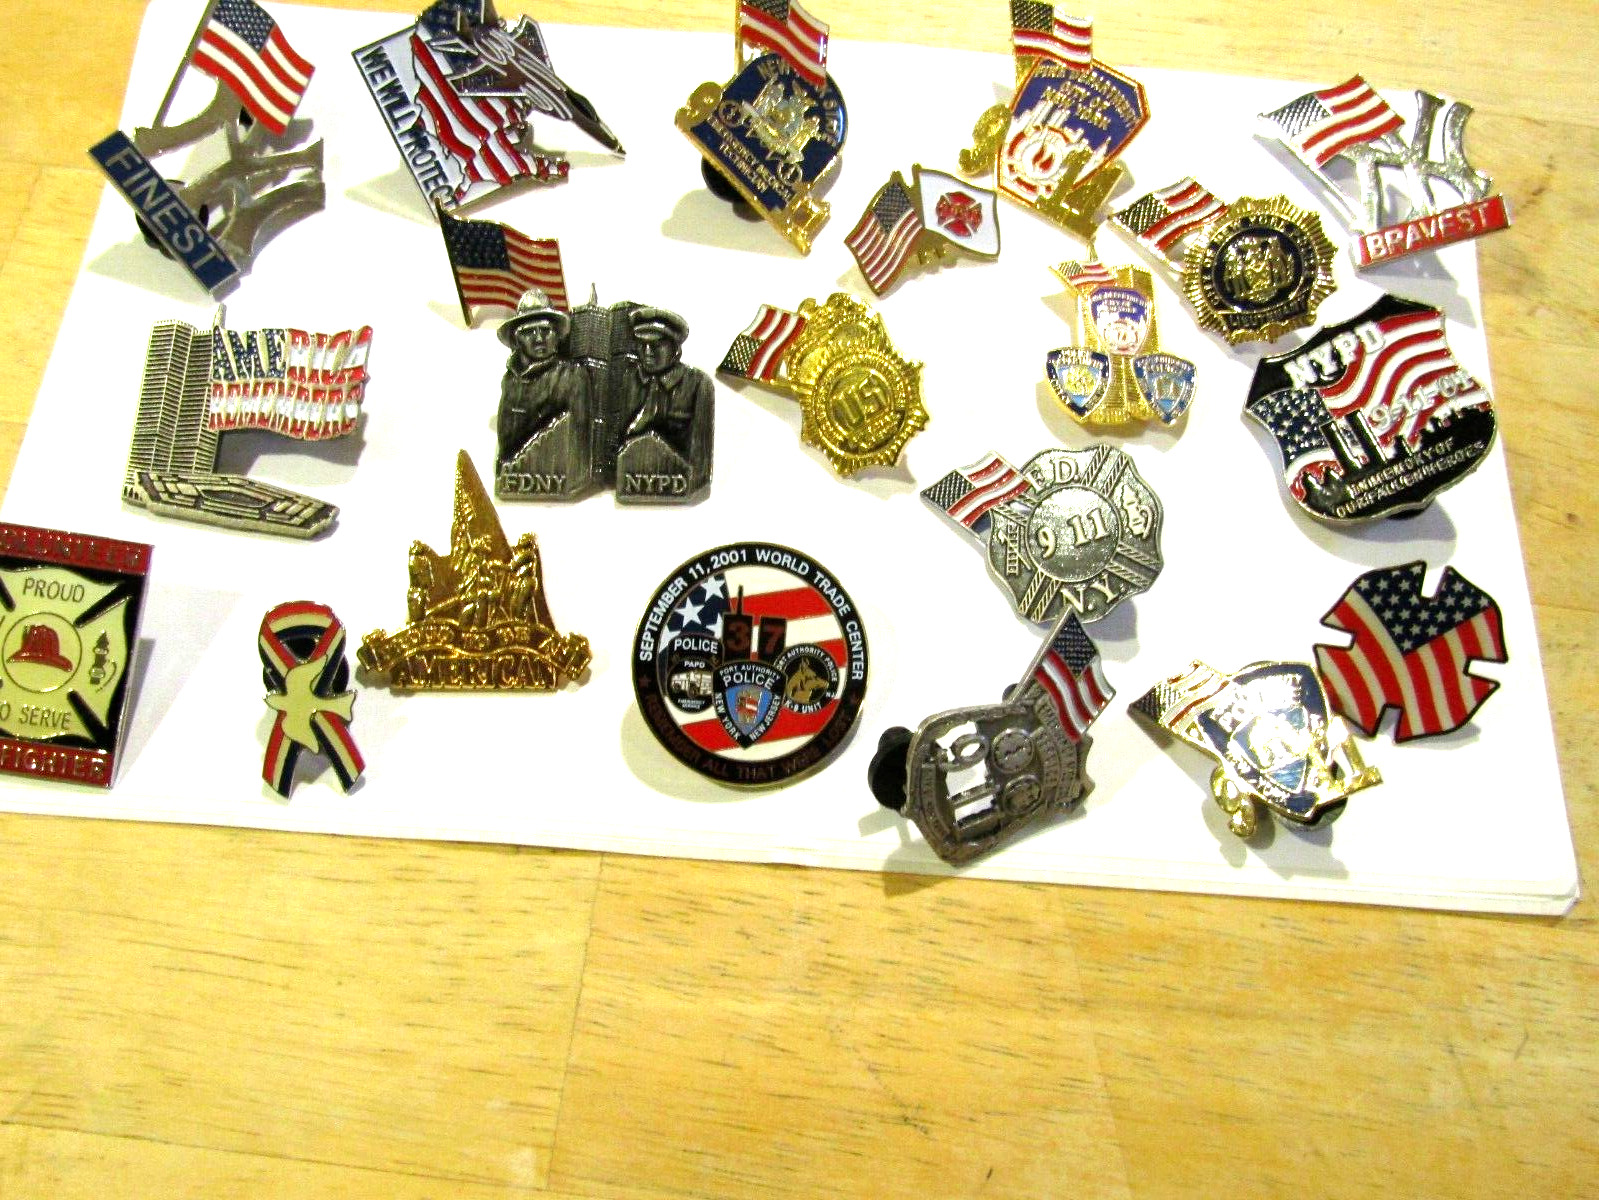 Lot of 21 9/11 AMERICAN HEROES LAPEL PINS FDNY NYPD EMS 911 Fire Rescue Police